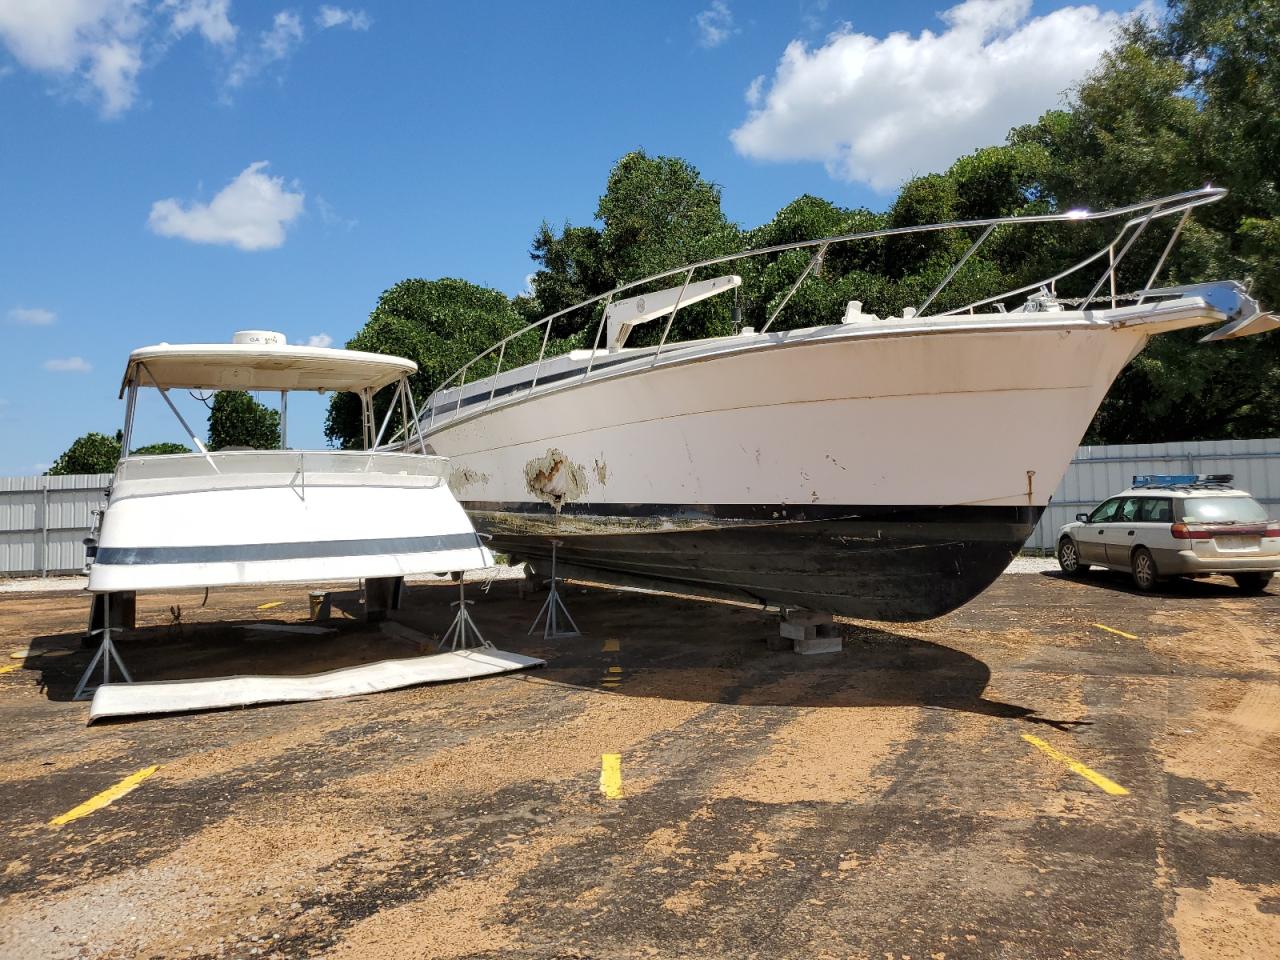 RJH4313***** Salvage and Wrecked 2001 Rivi Boat in AL - Theodore